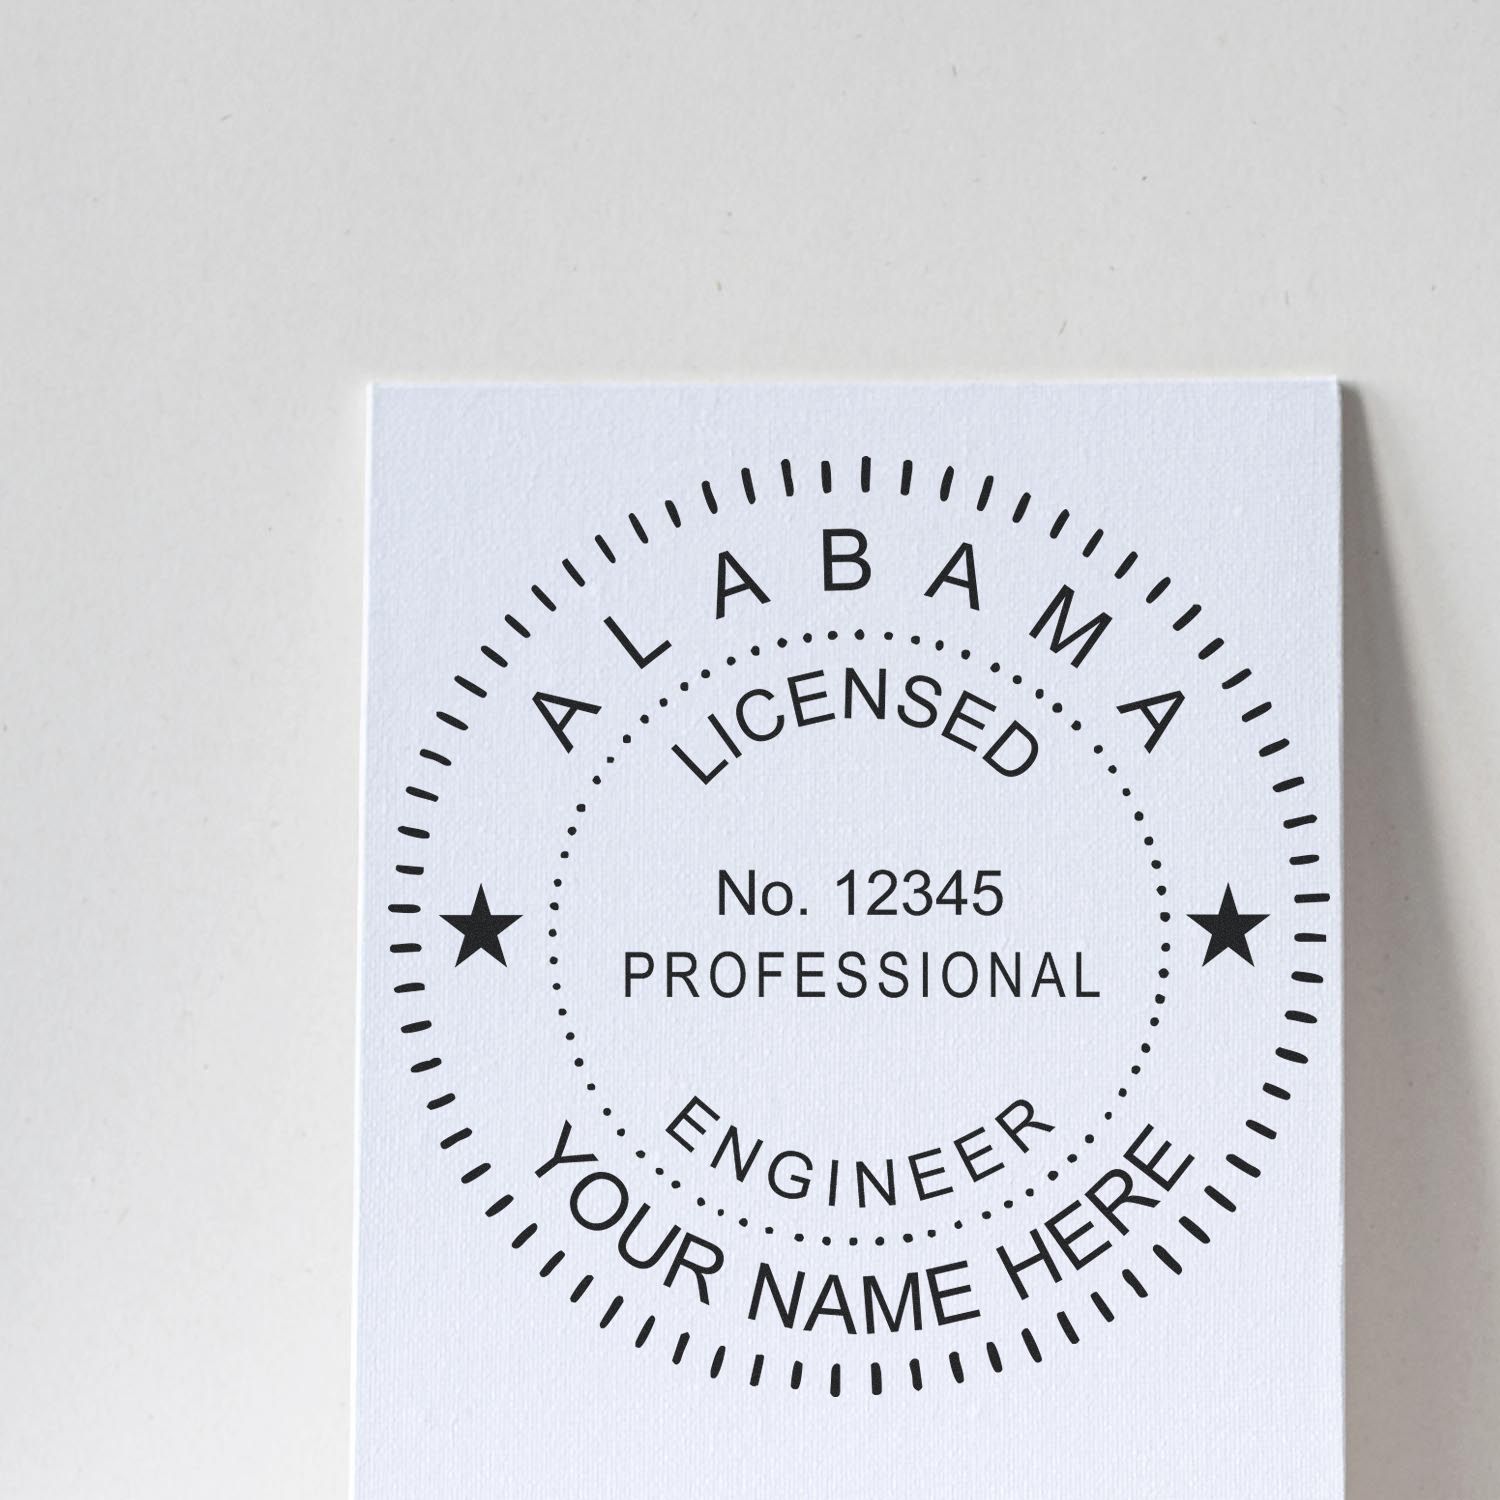 Sealing Your Engineering Expertise: The Alabama Professional Engineer Stamp Feature Image